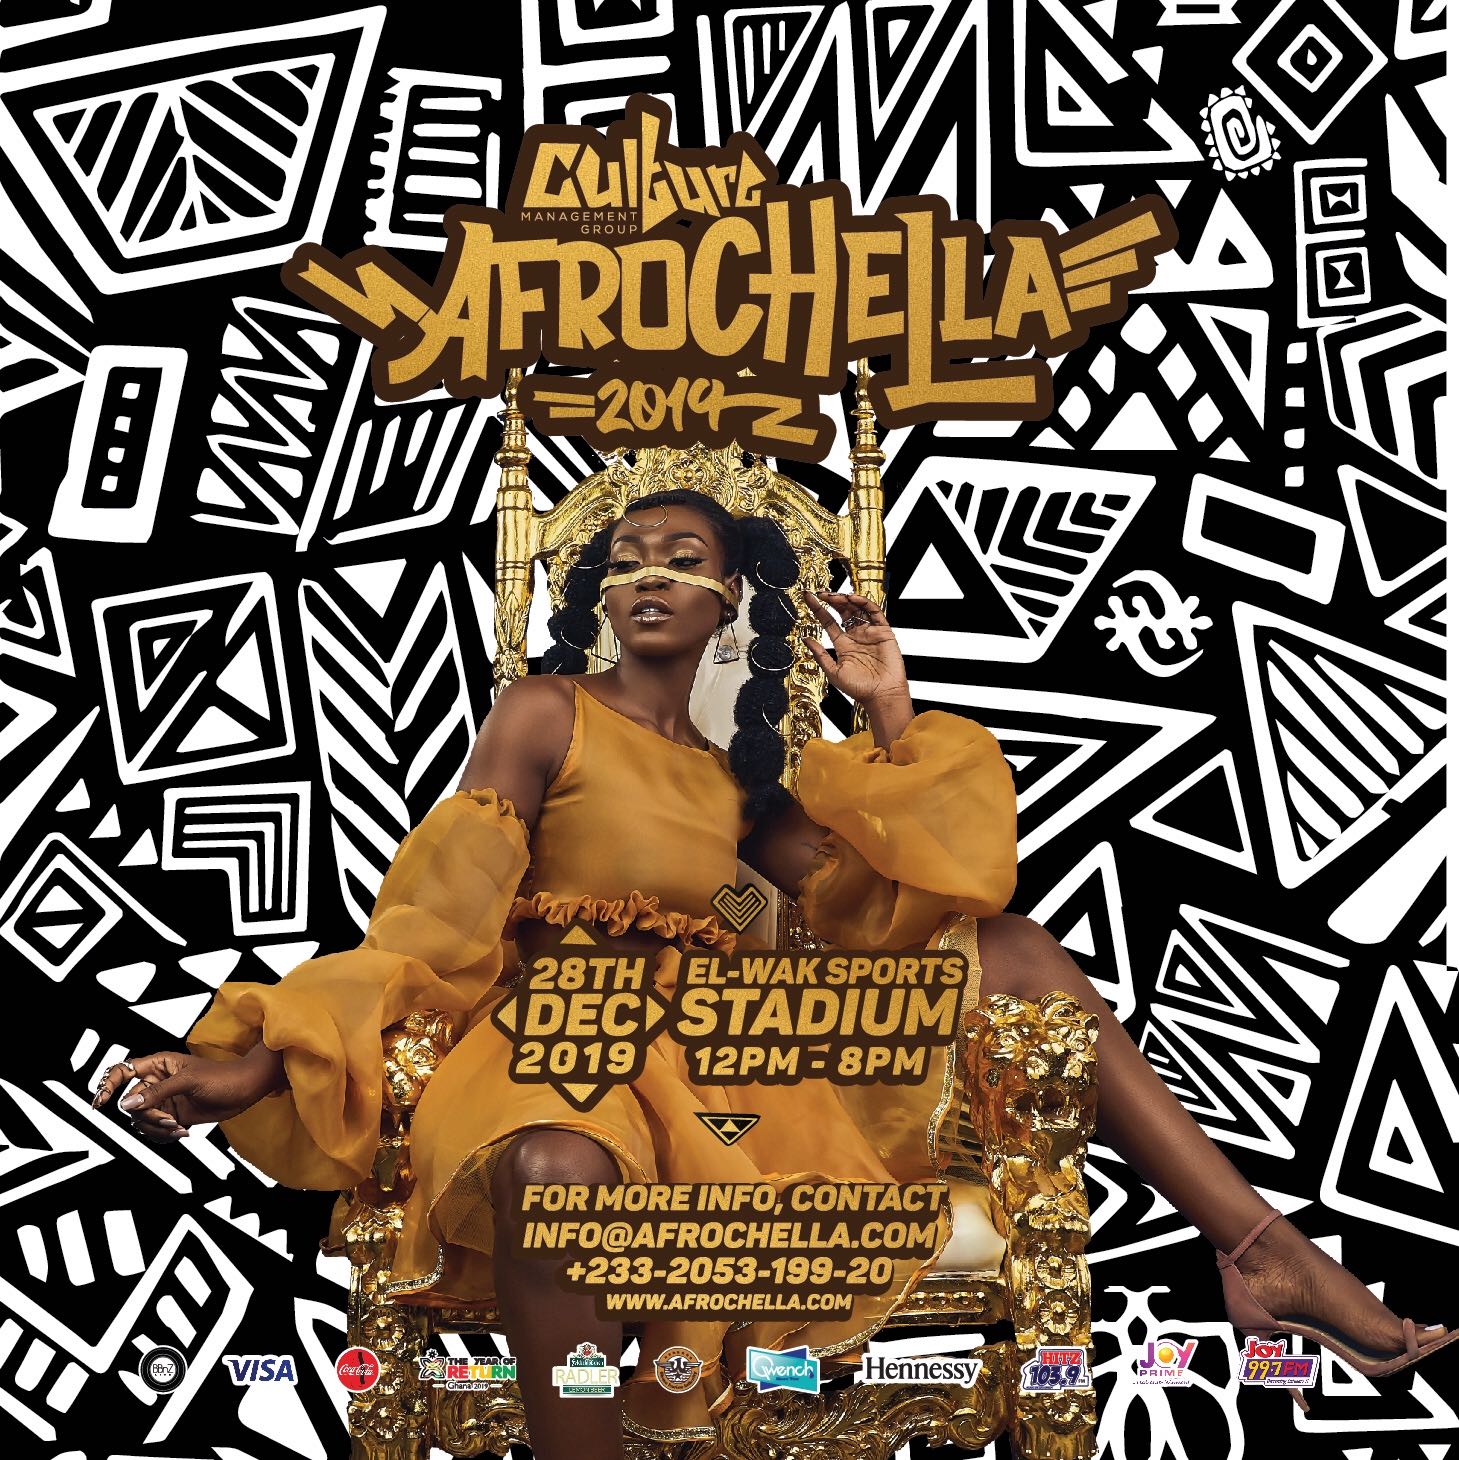 Afrochella announces 2019 festival line-up and events